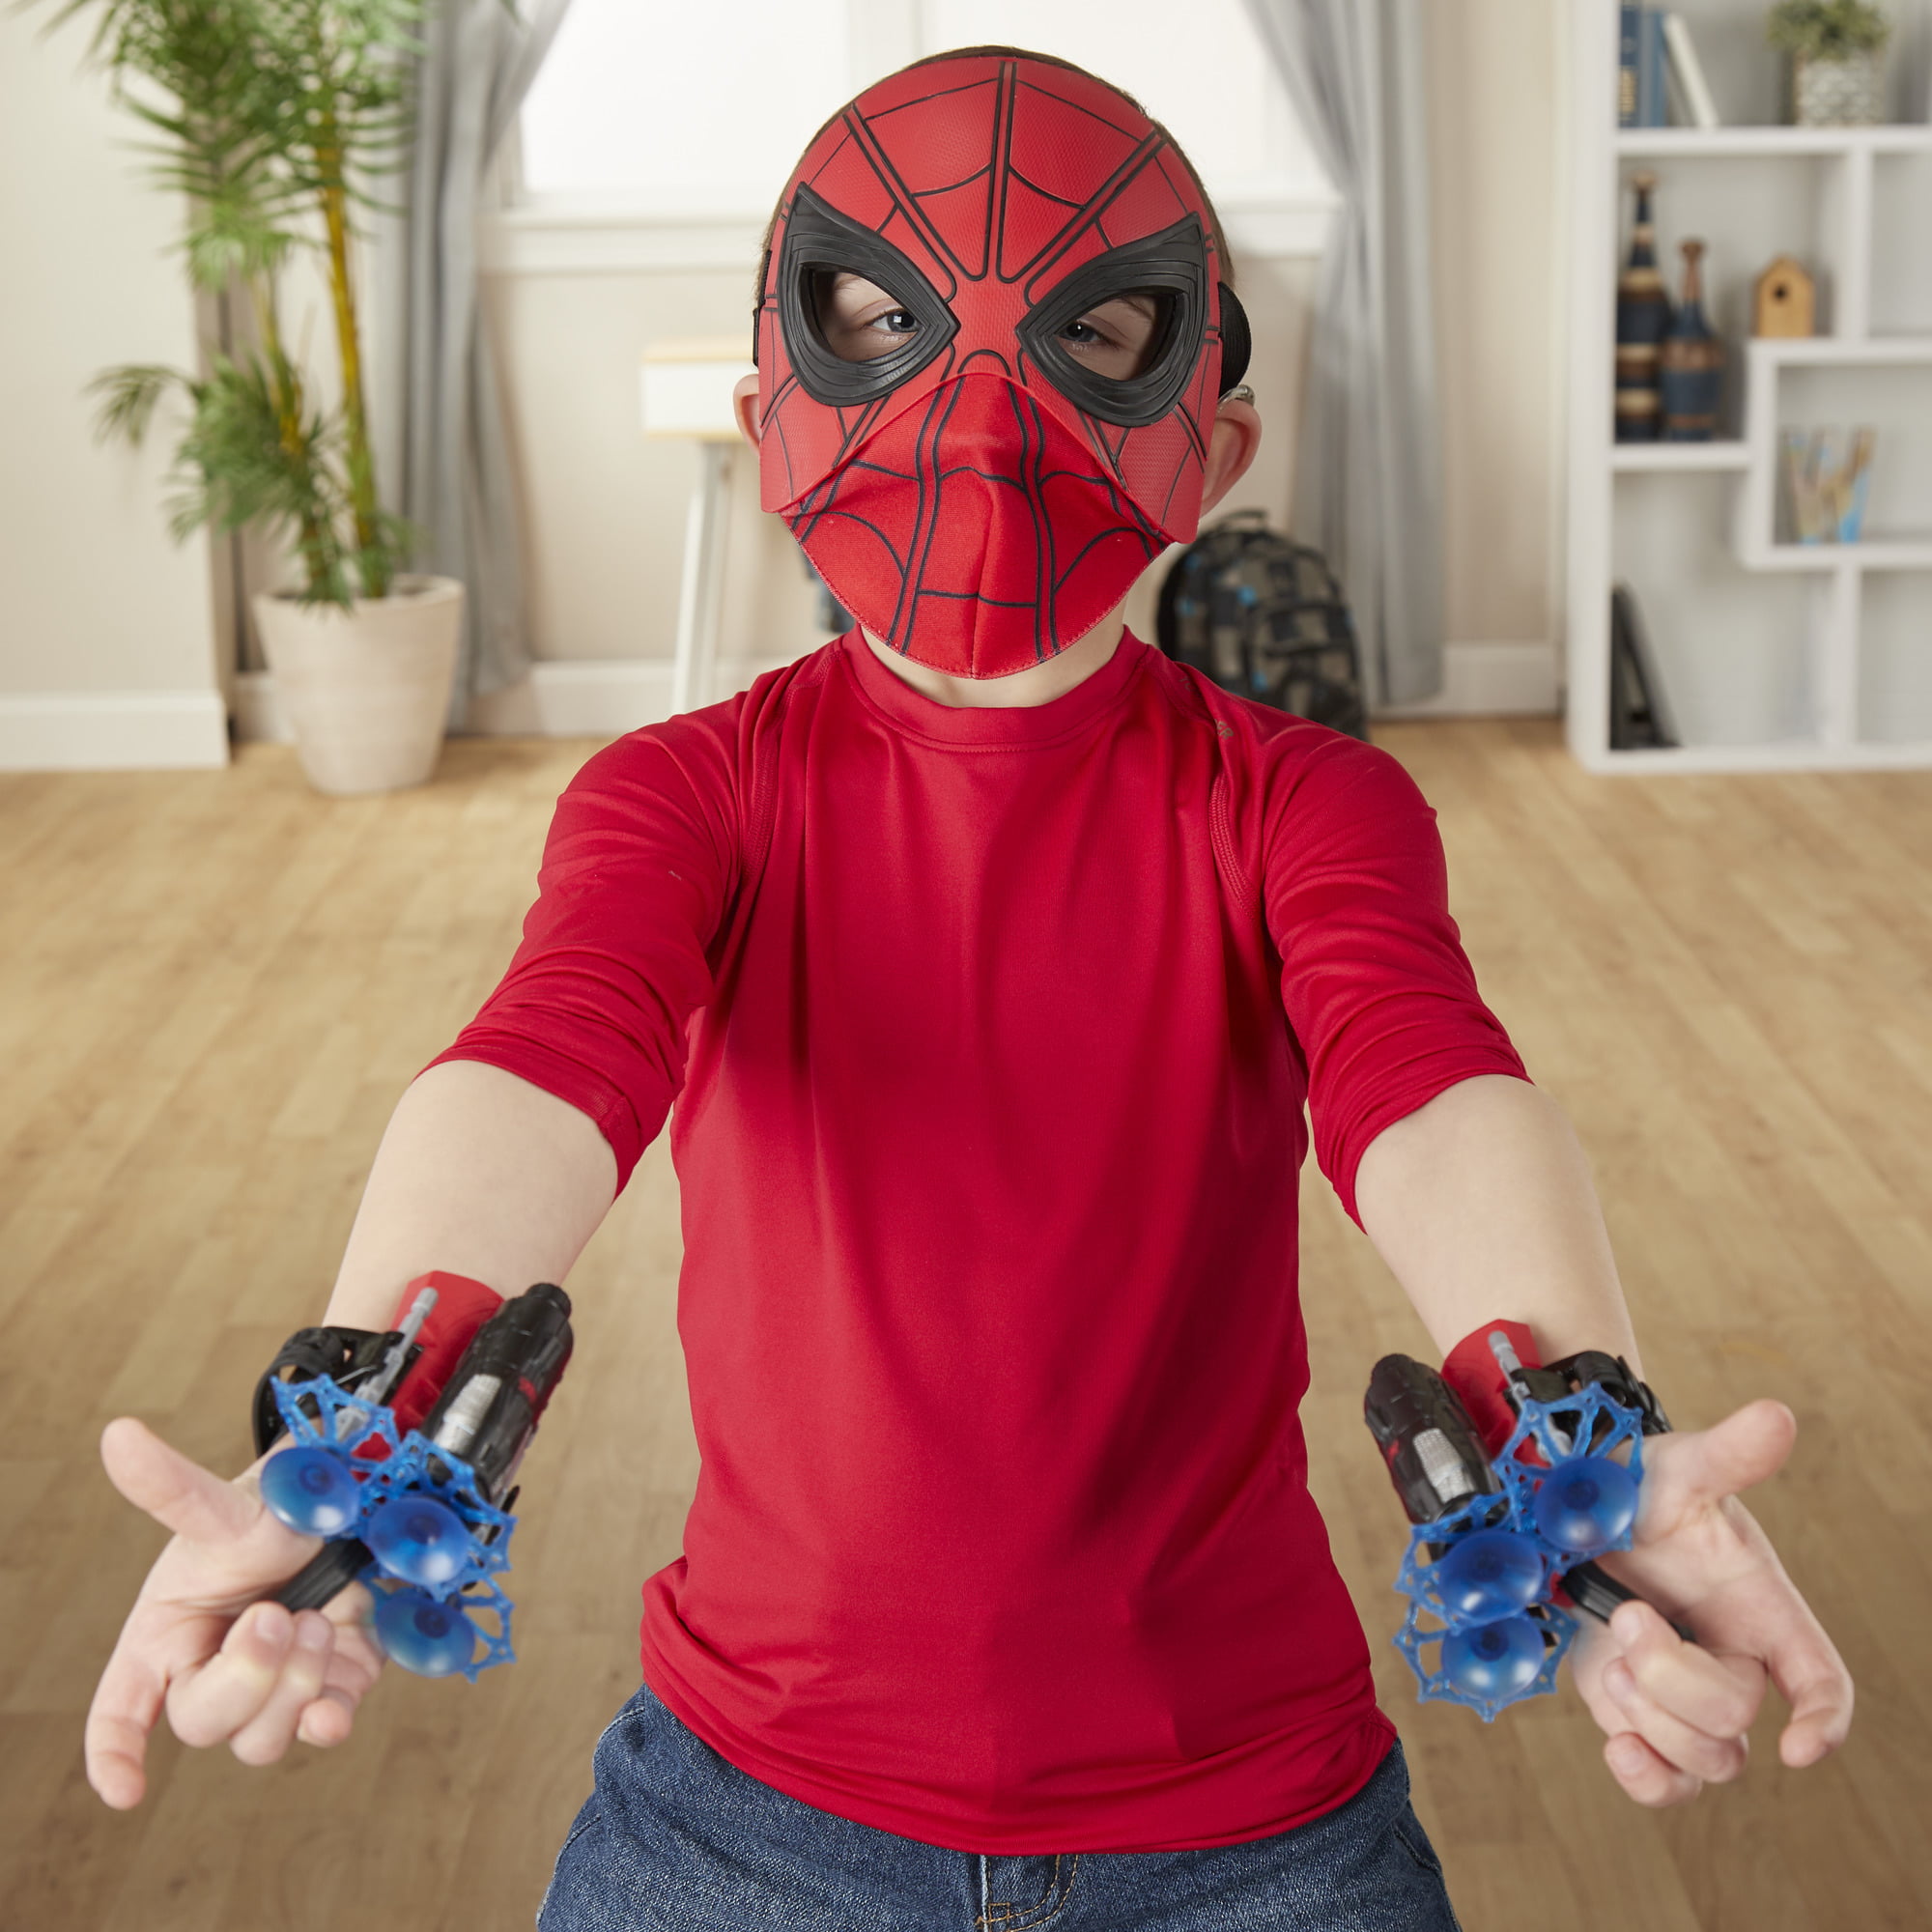 Spiderman far from home Toy Mask